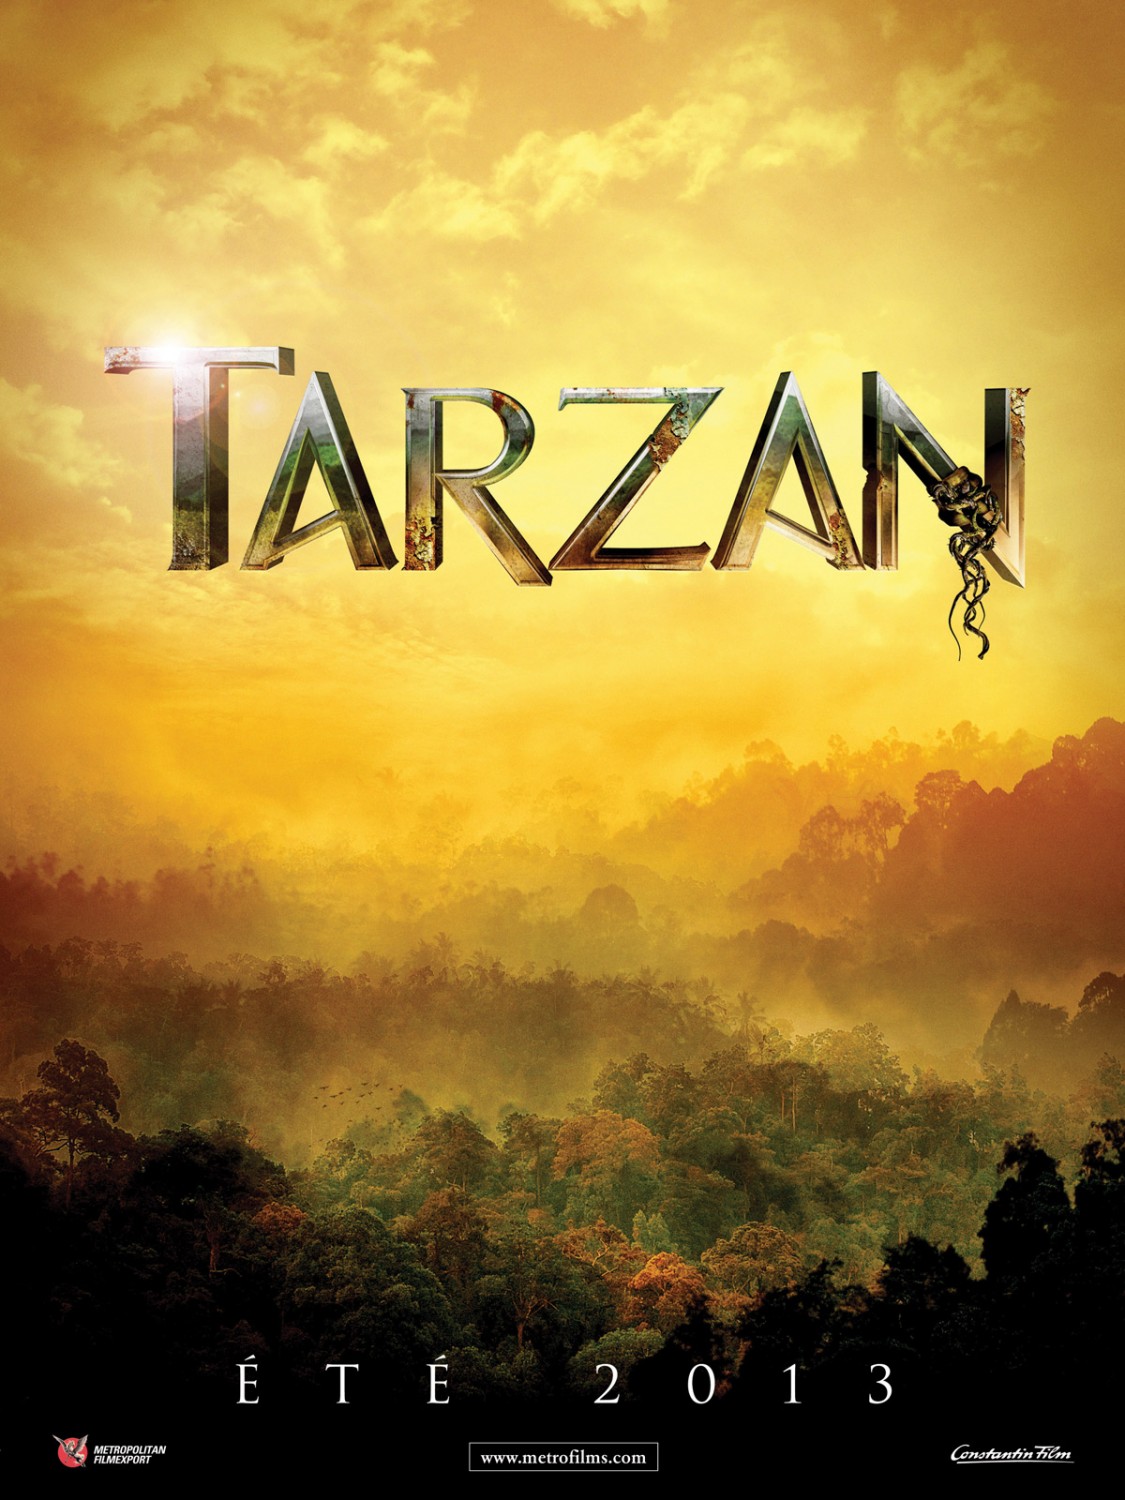 Extra Large Movie Poster Image for Tarzan (#1 of 9)